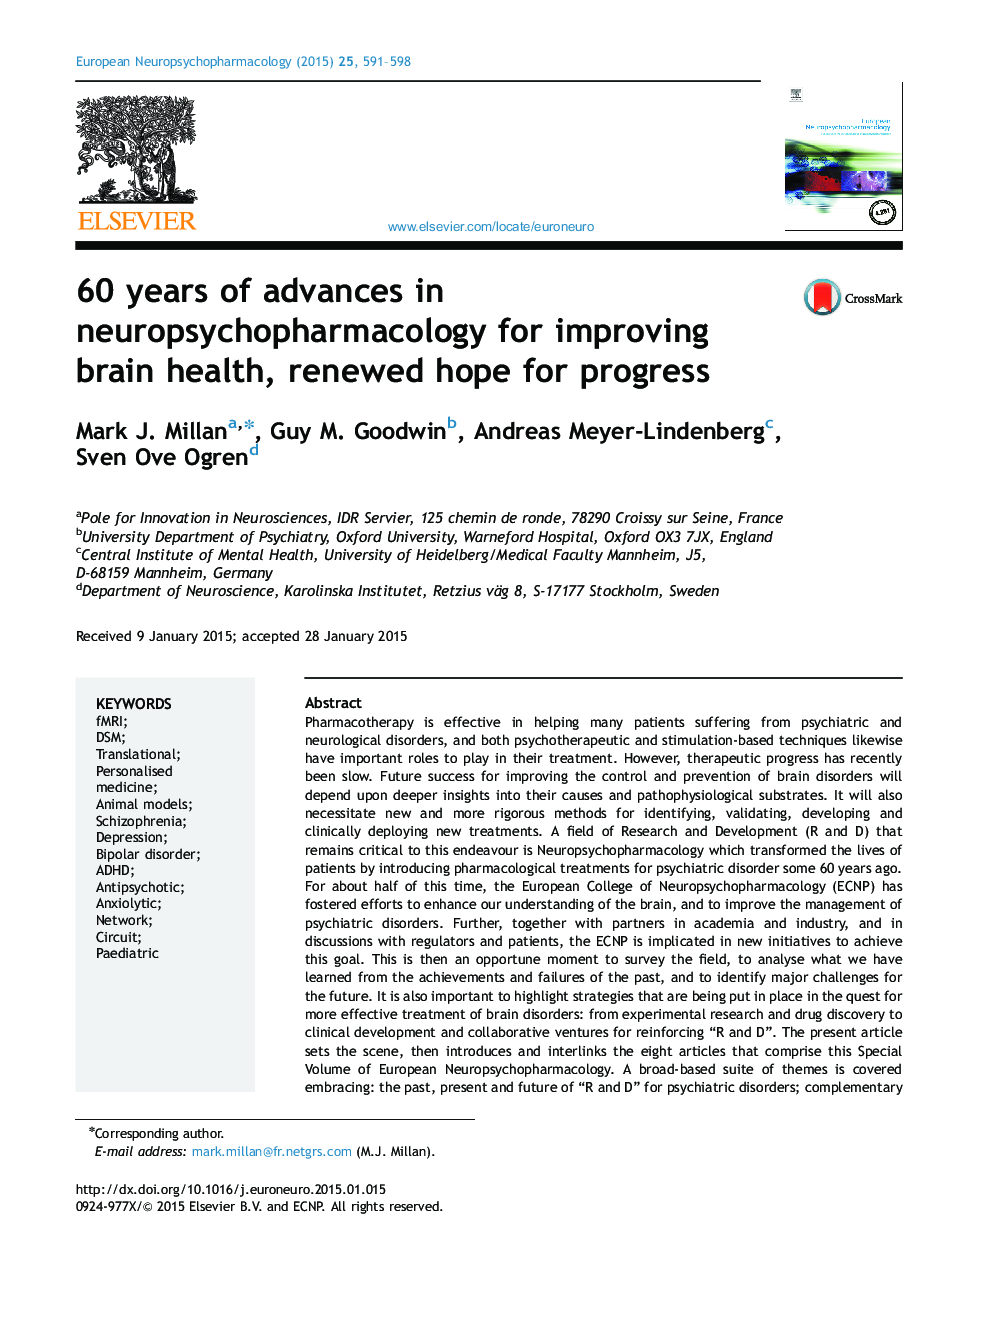 60 years of advances in neuropsychopharmacology for improving brain health, renewed hope for progress